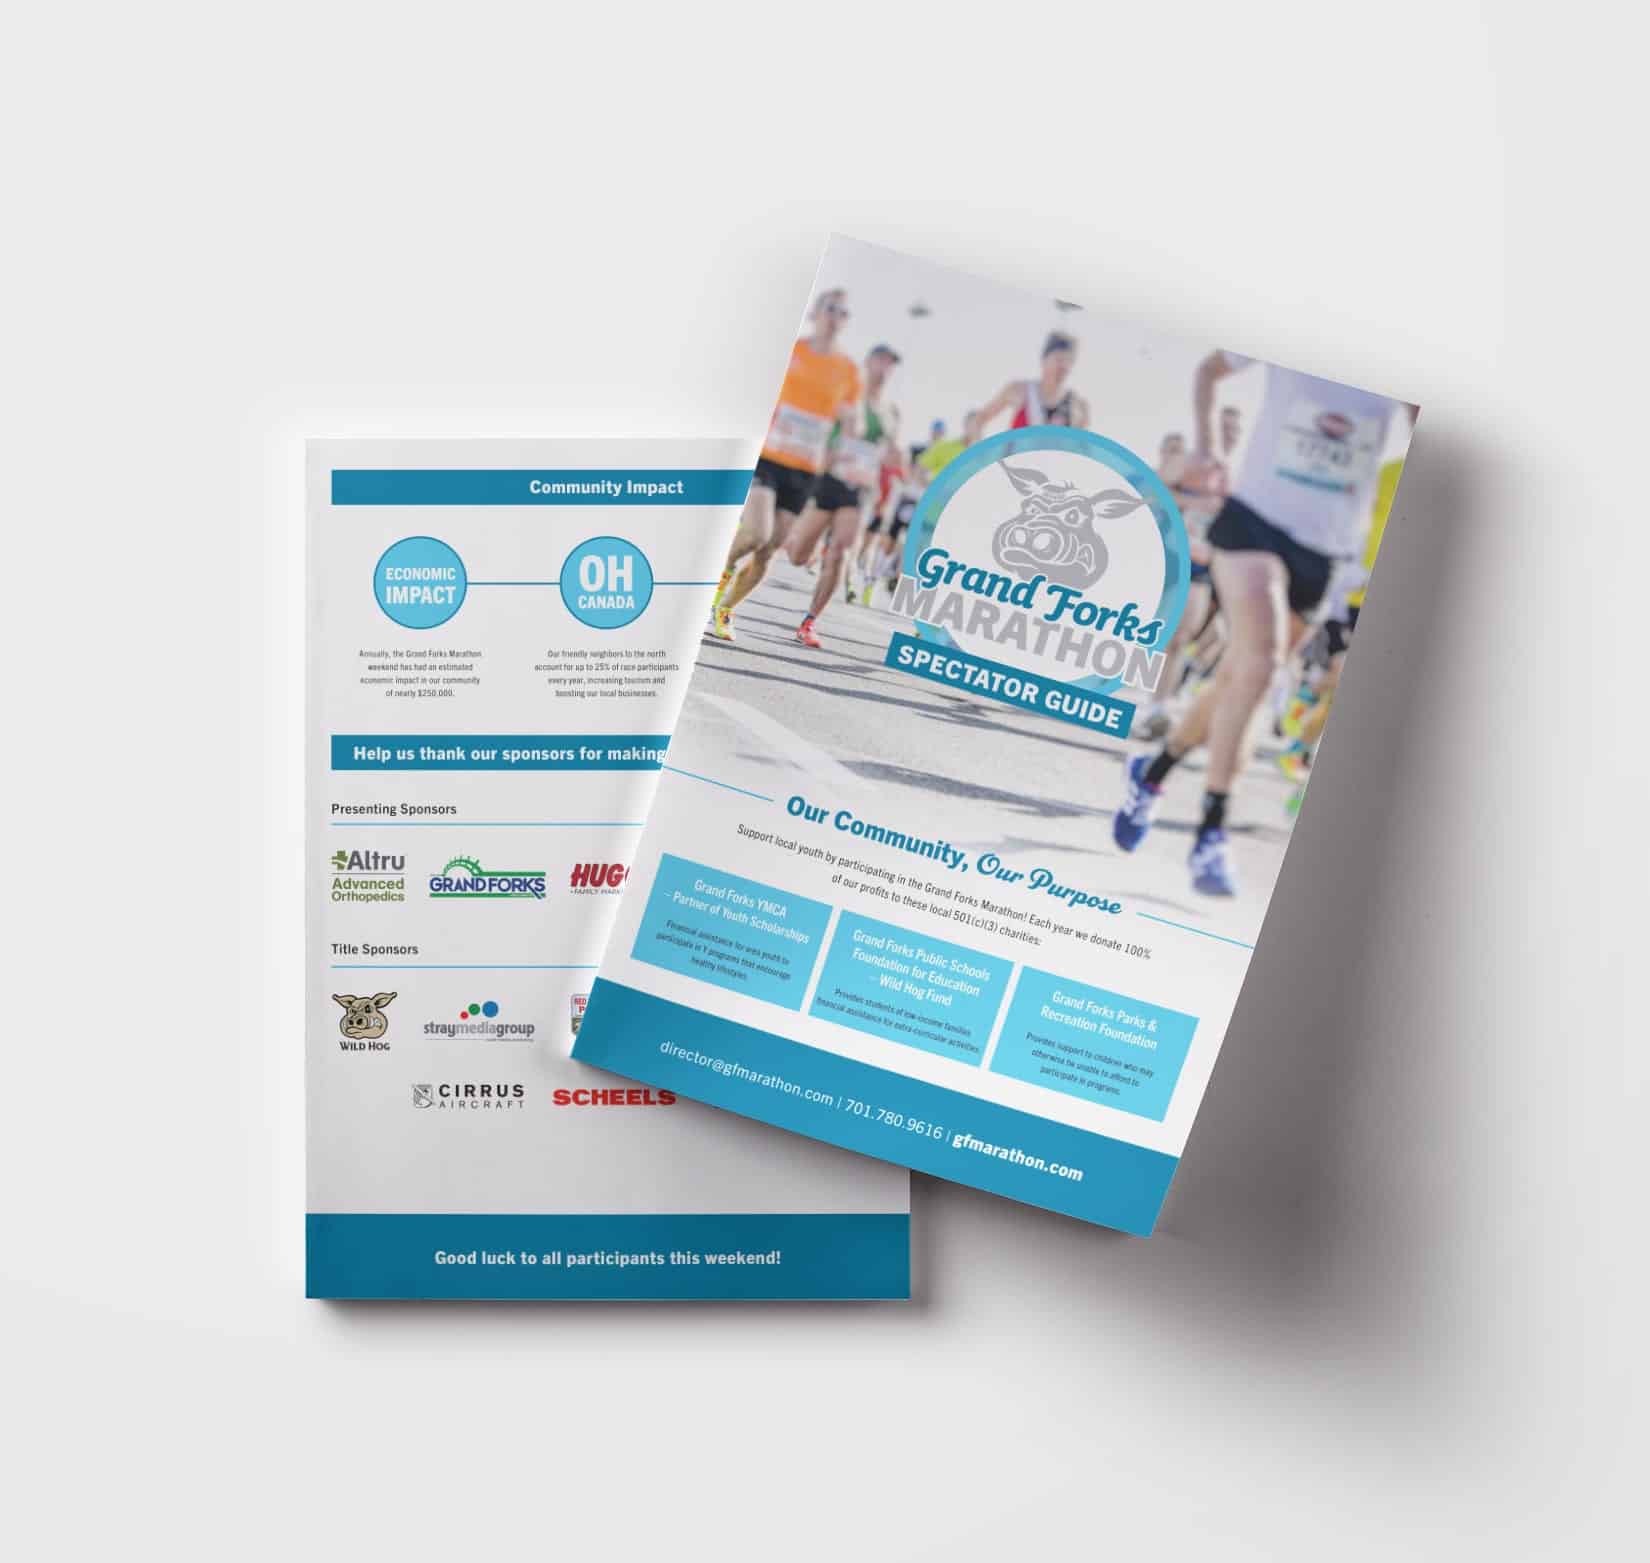 A designed and printed guide for Grand Forks Marathon.